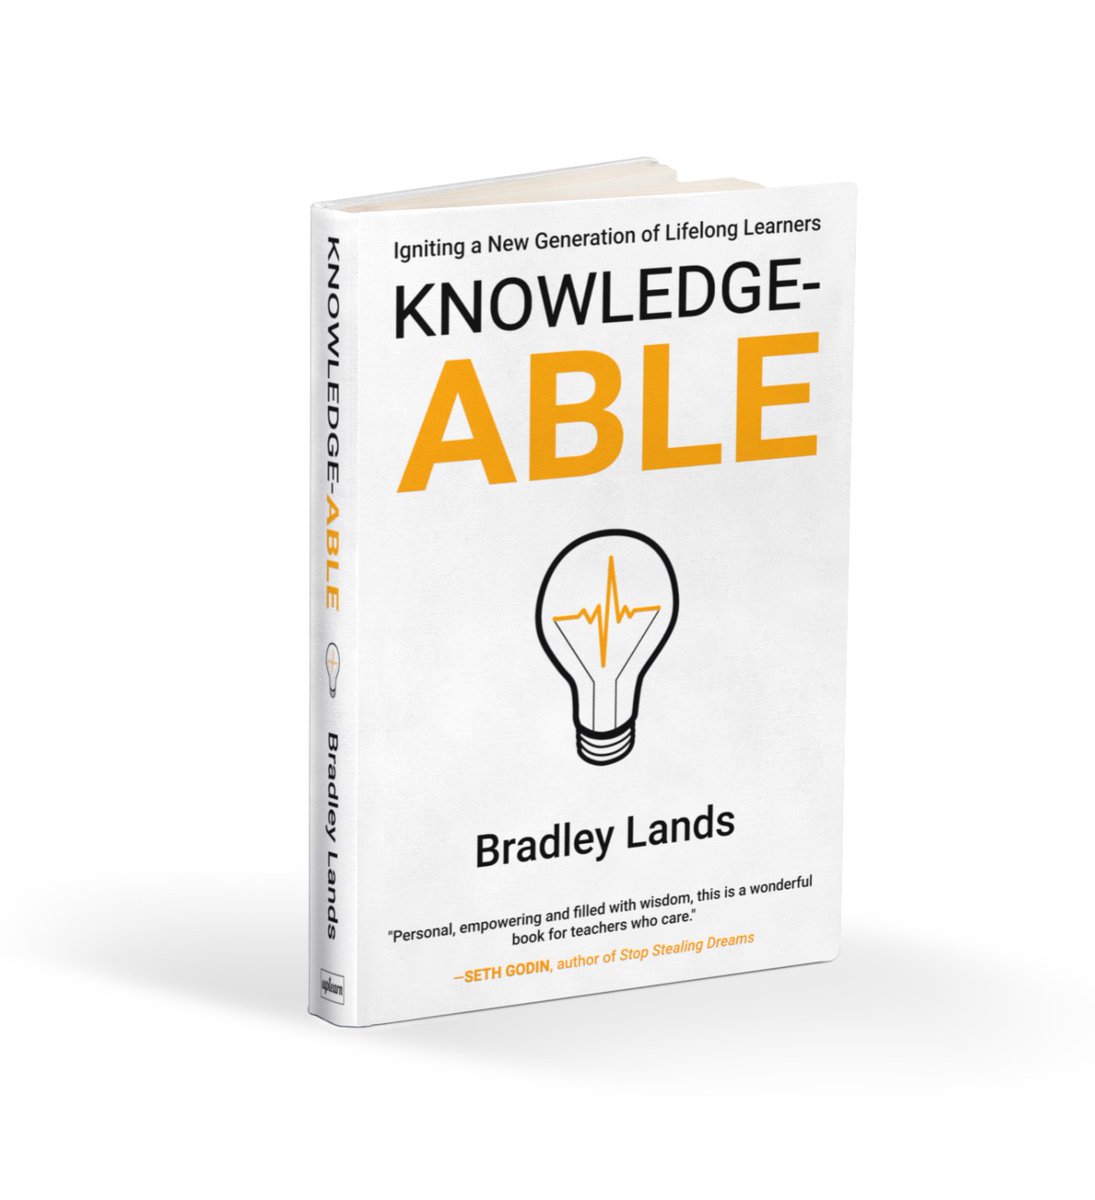 @mjjohnson1216 Hi Meredith! I love this #BookCampPD platform for professional development you have created for teachers! I just launched my first book titled Knowledge-ABLE and hoping you might consider it for your list. uplearnllc.com/book